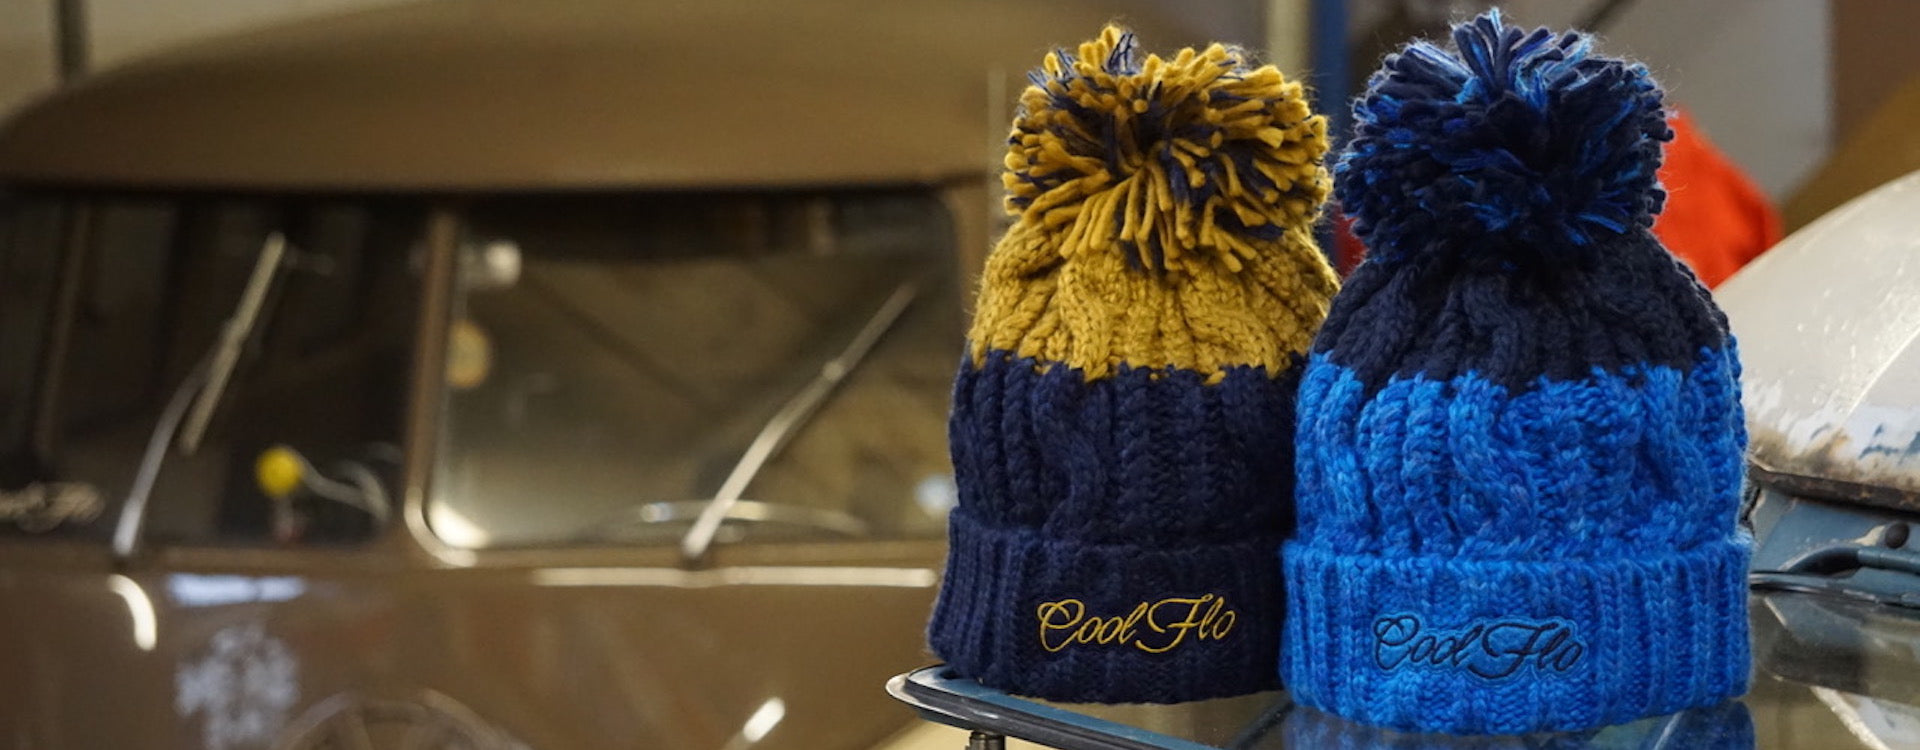 Two Cool Flo winter bobble hats sitting on an open VW campervan safari window with a VW bus in the background.